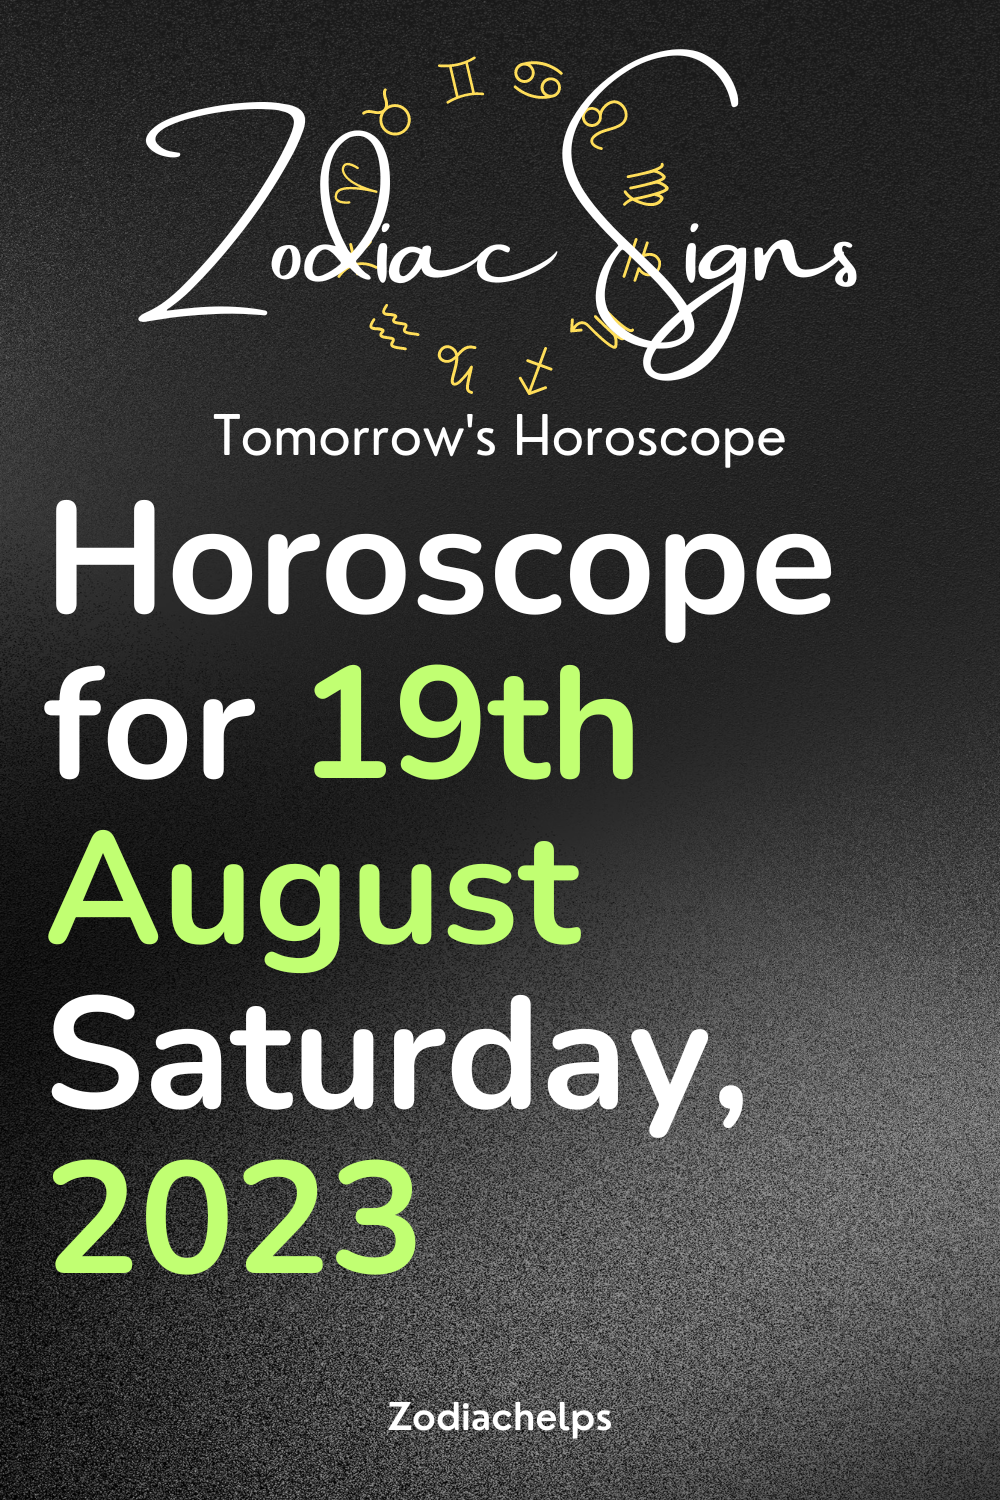 Horoscope for 19th August Saturday, 2023